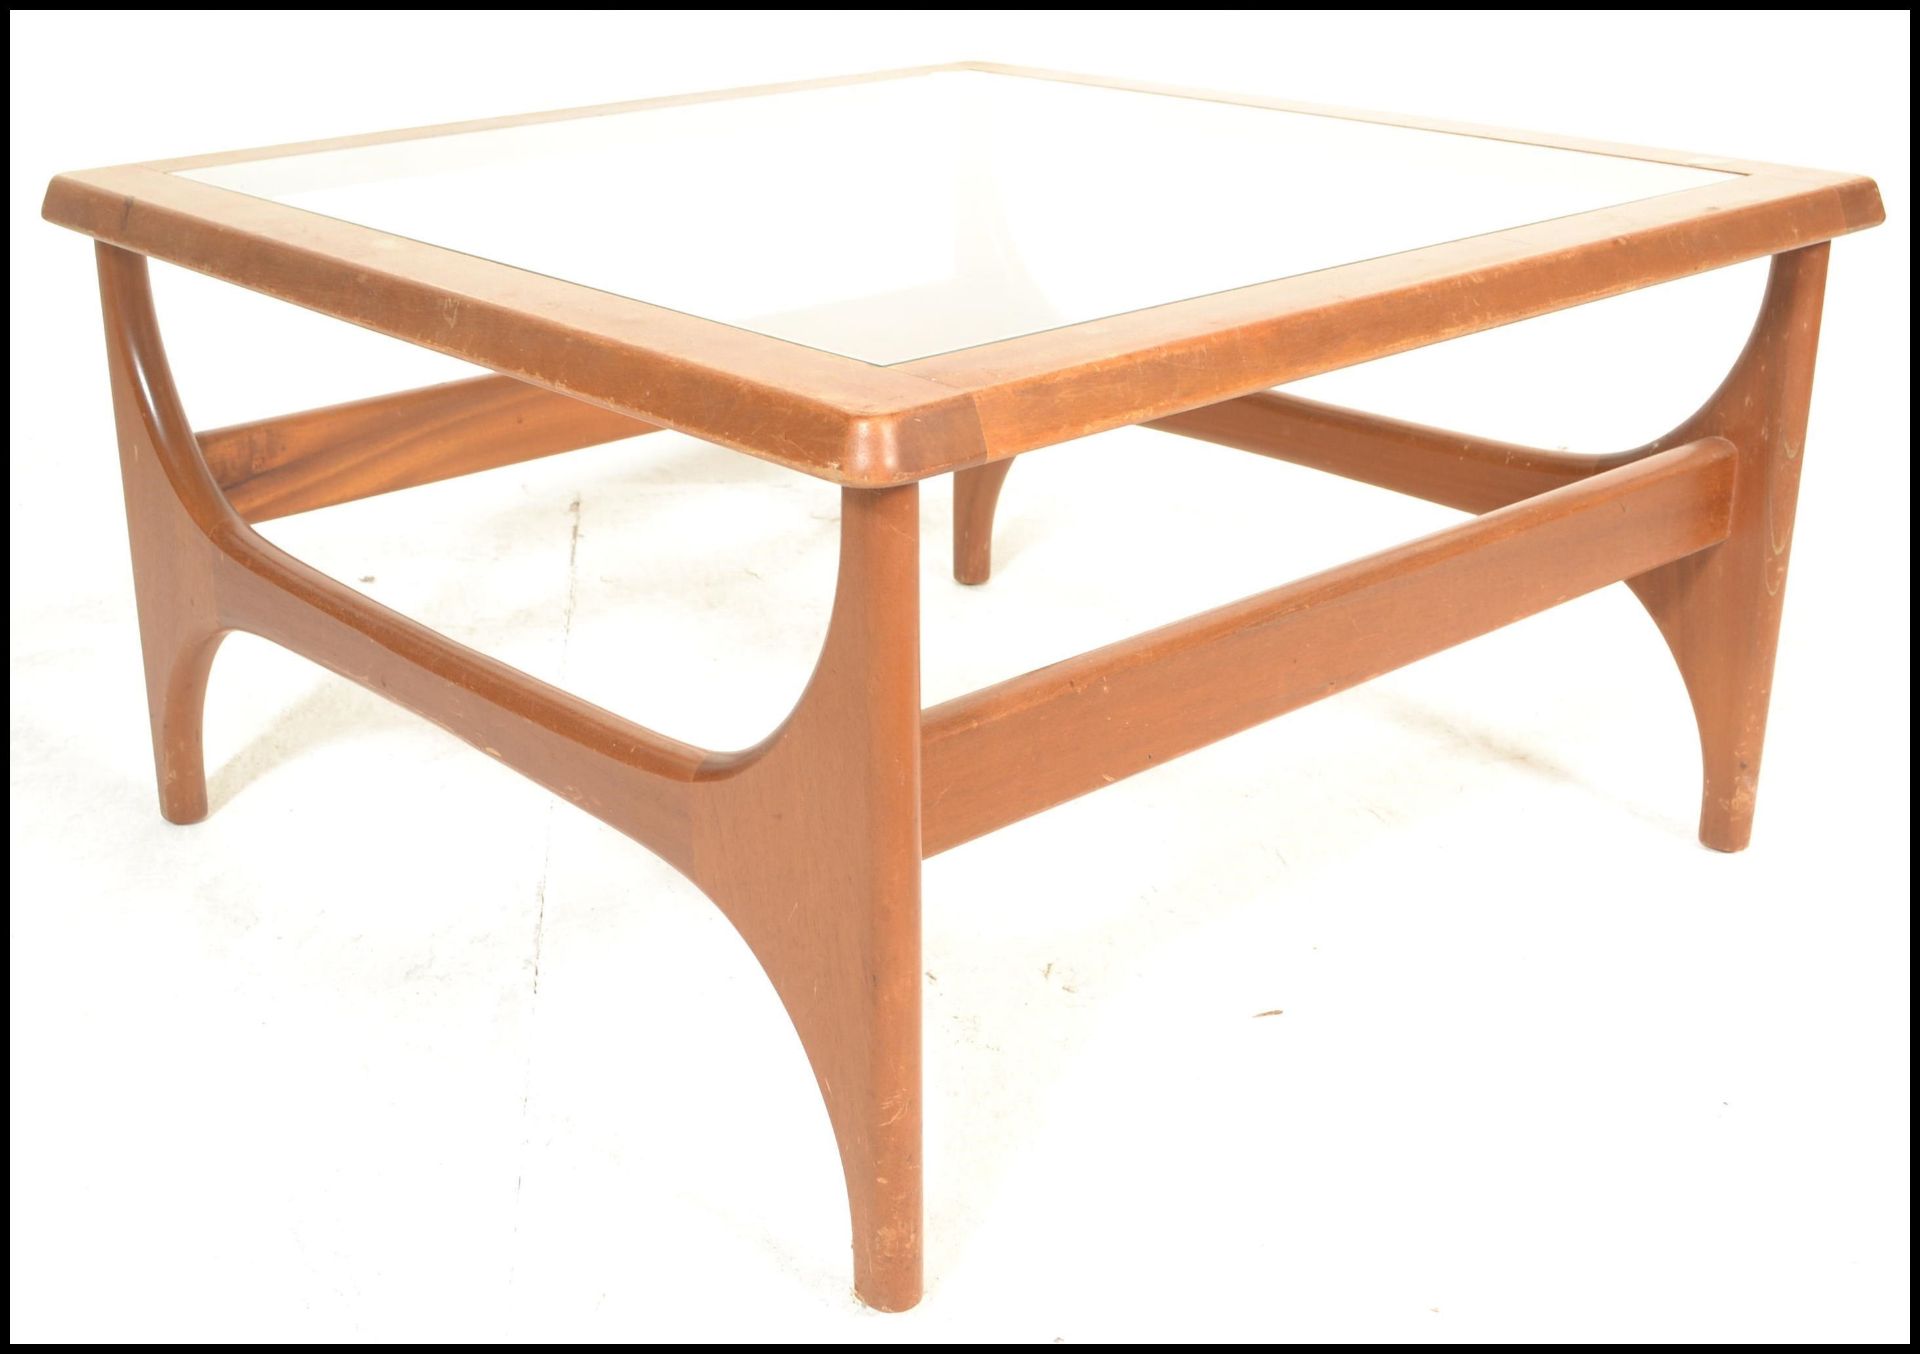 Stonehill- Stateroom- A retro mid 20th Century teak wood coffee table of square form having inset